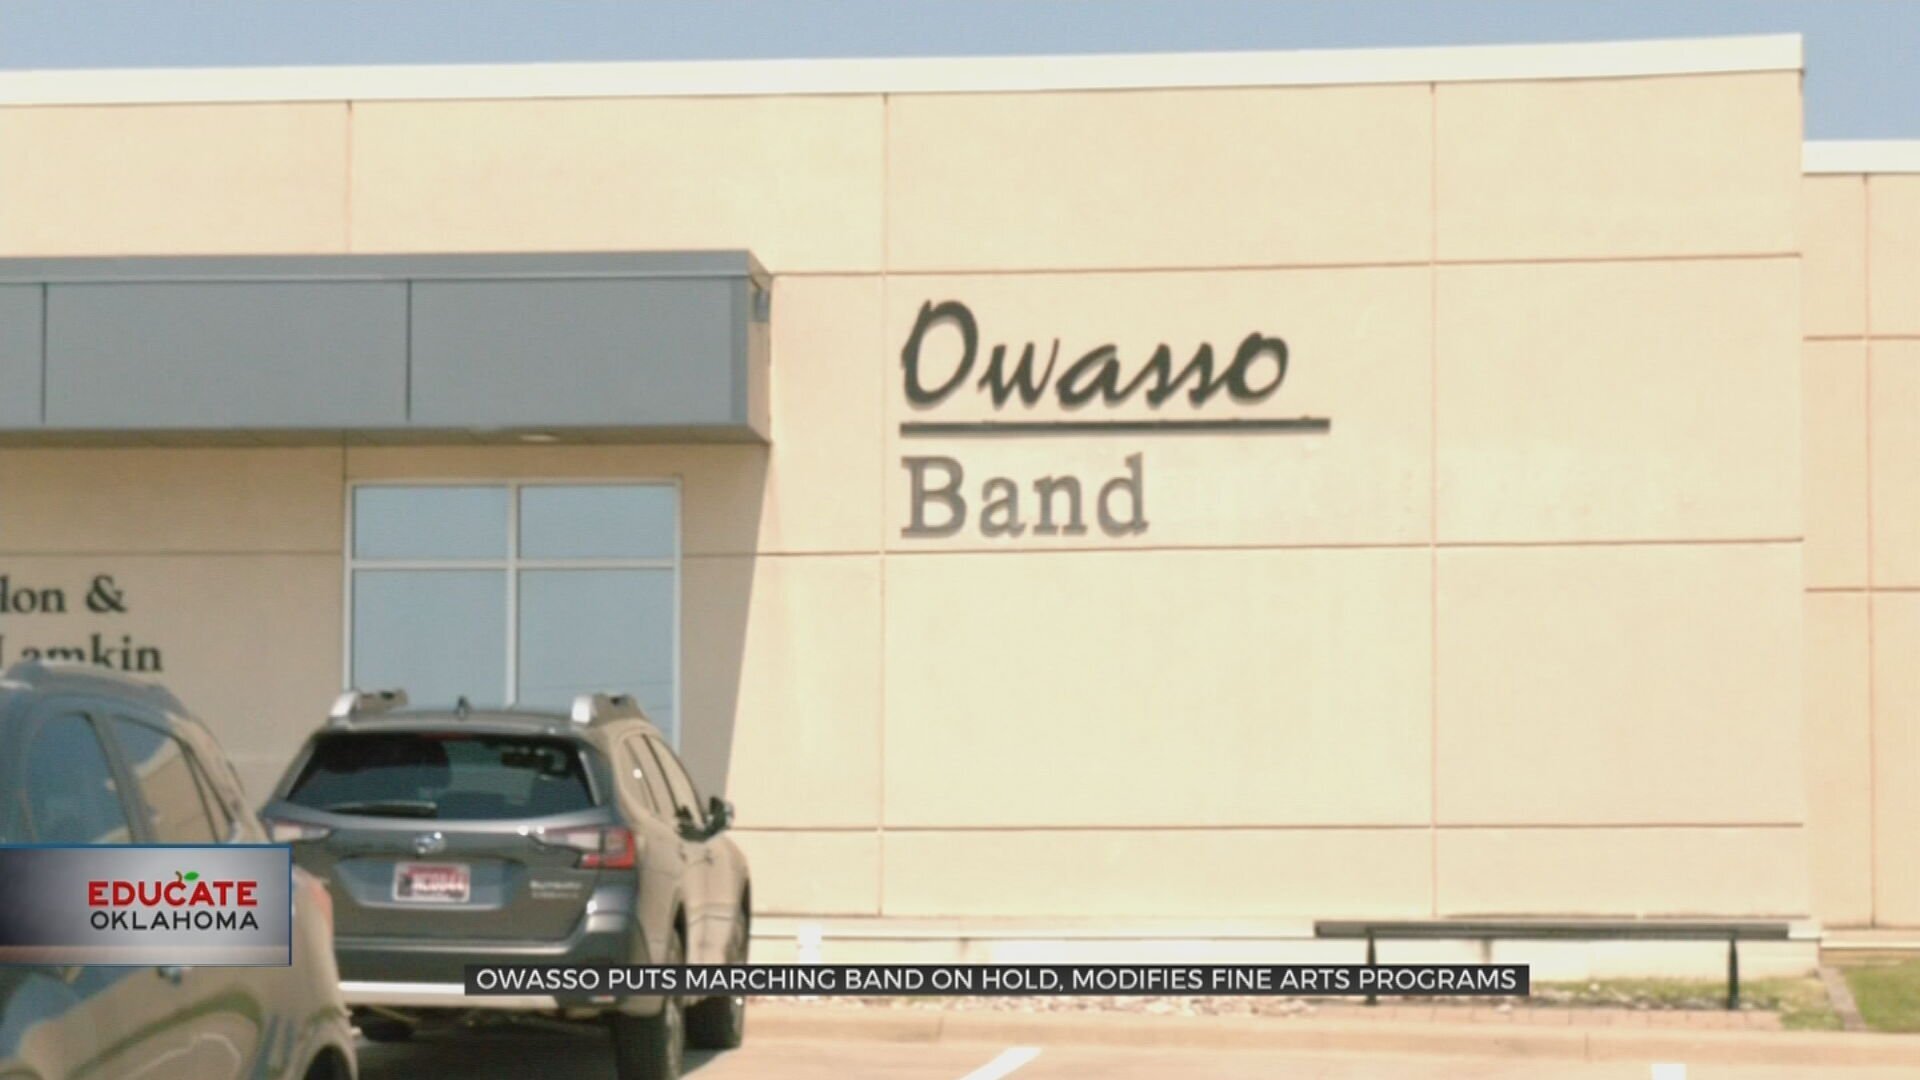 Owasso Puts Marching Band Rehearsals On Hold, Modifies Fine Arts Programs 